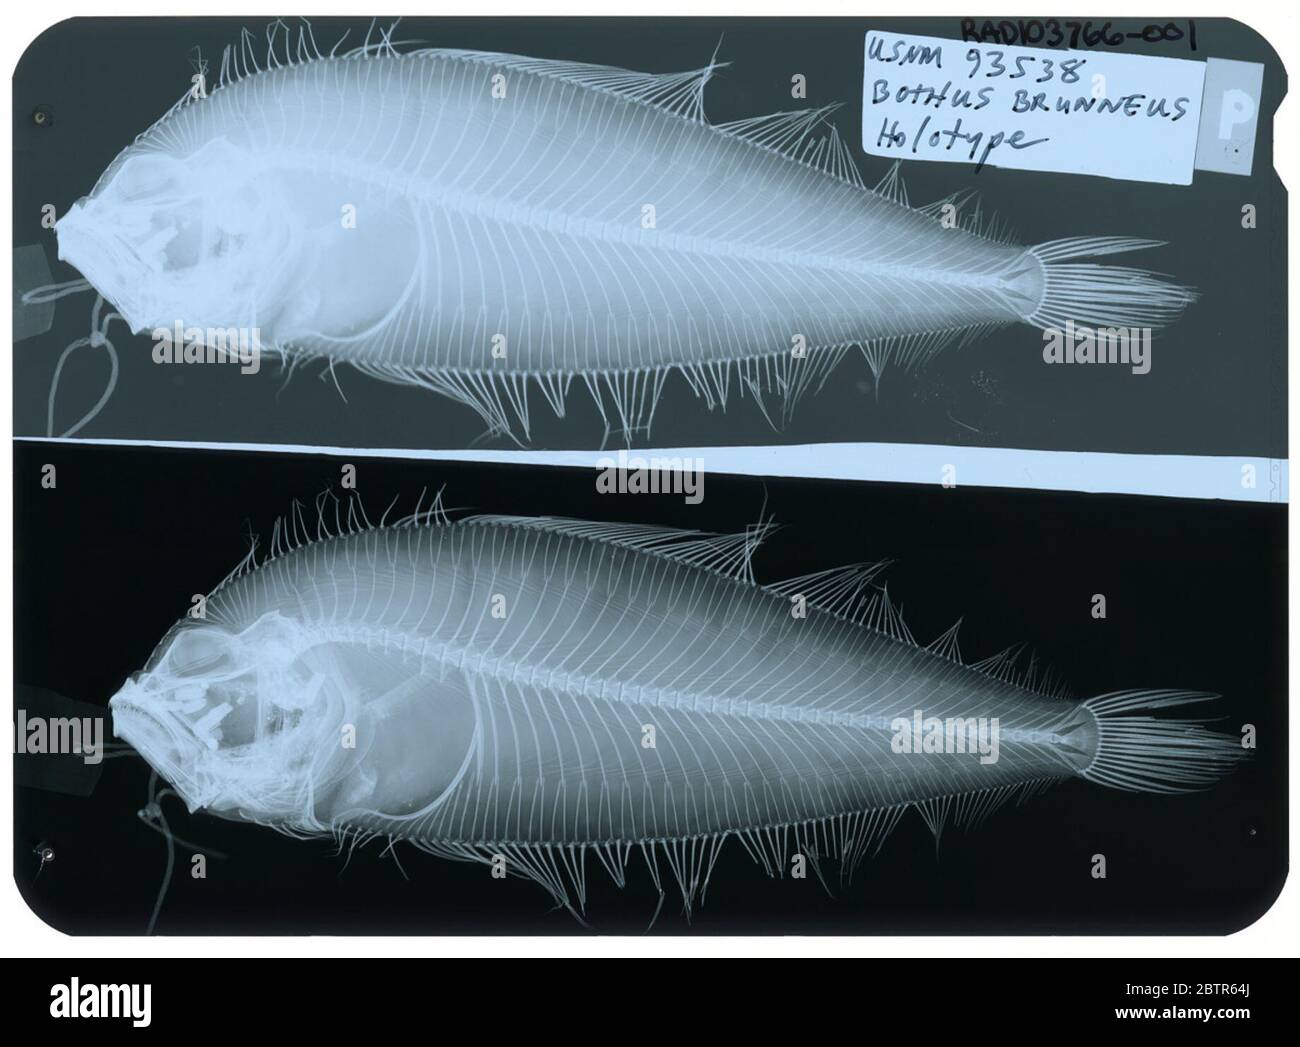 Bothus brunneus. Radiograph is of a paratype; The Smithsonian NMNH Division of Fishes uses the convention of maintaining the original species name for type specimens designated at the time of description. The currently accepted name for this species is Arnoglossus brunneus.29 Oct 2018D 54541 Stock Photo